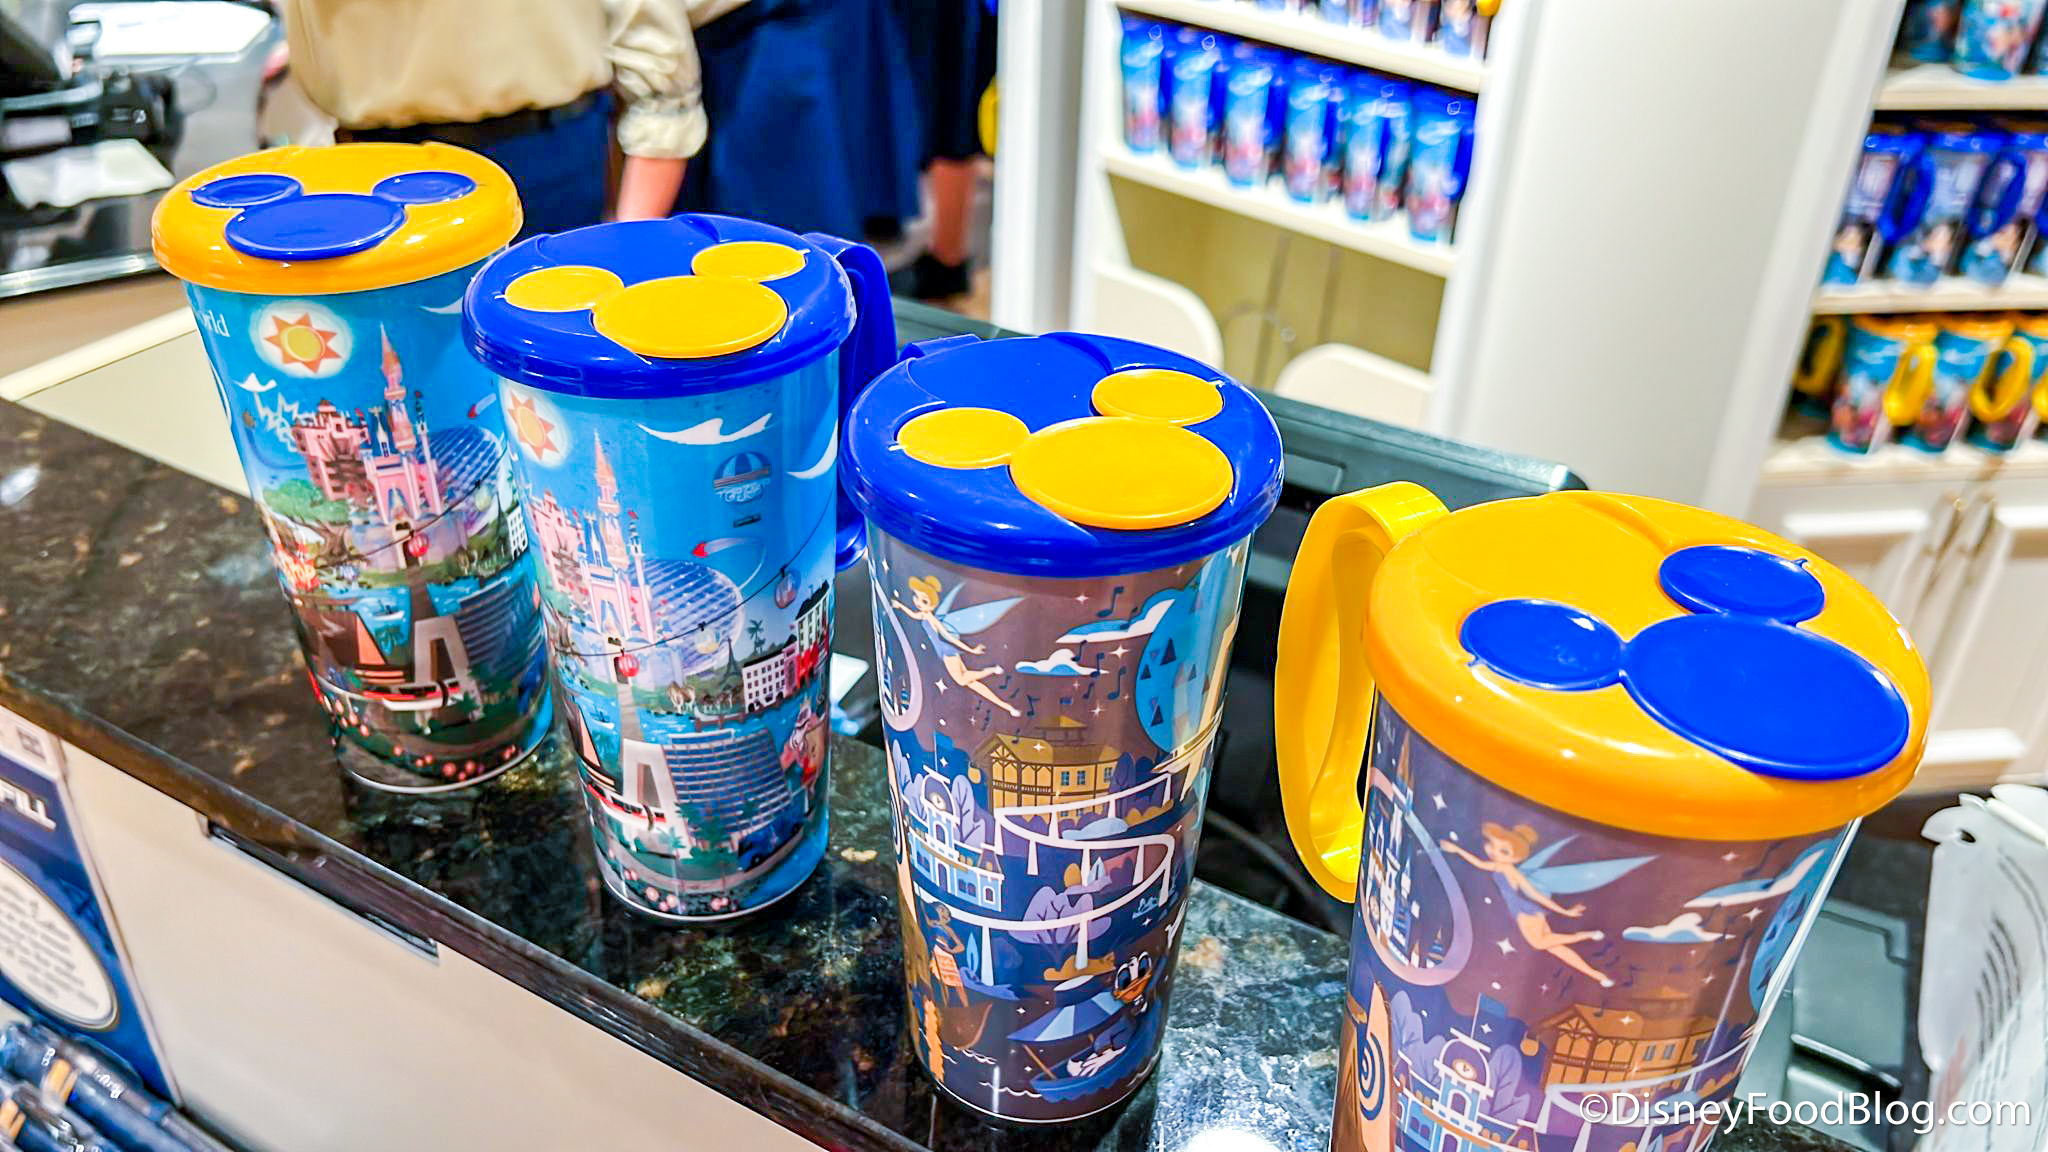 Disney World Refillable Mugs 2024 - Pricing, Tips, Worth the Cost?